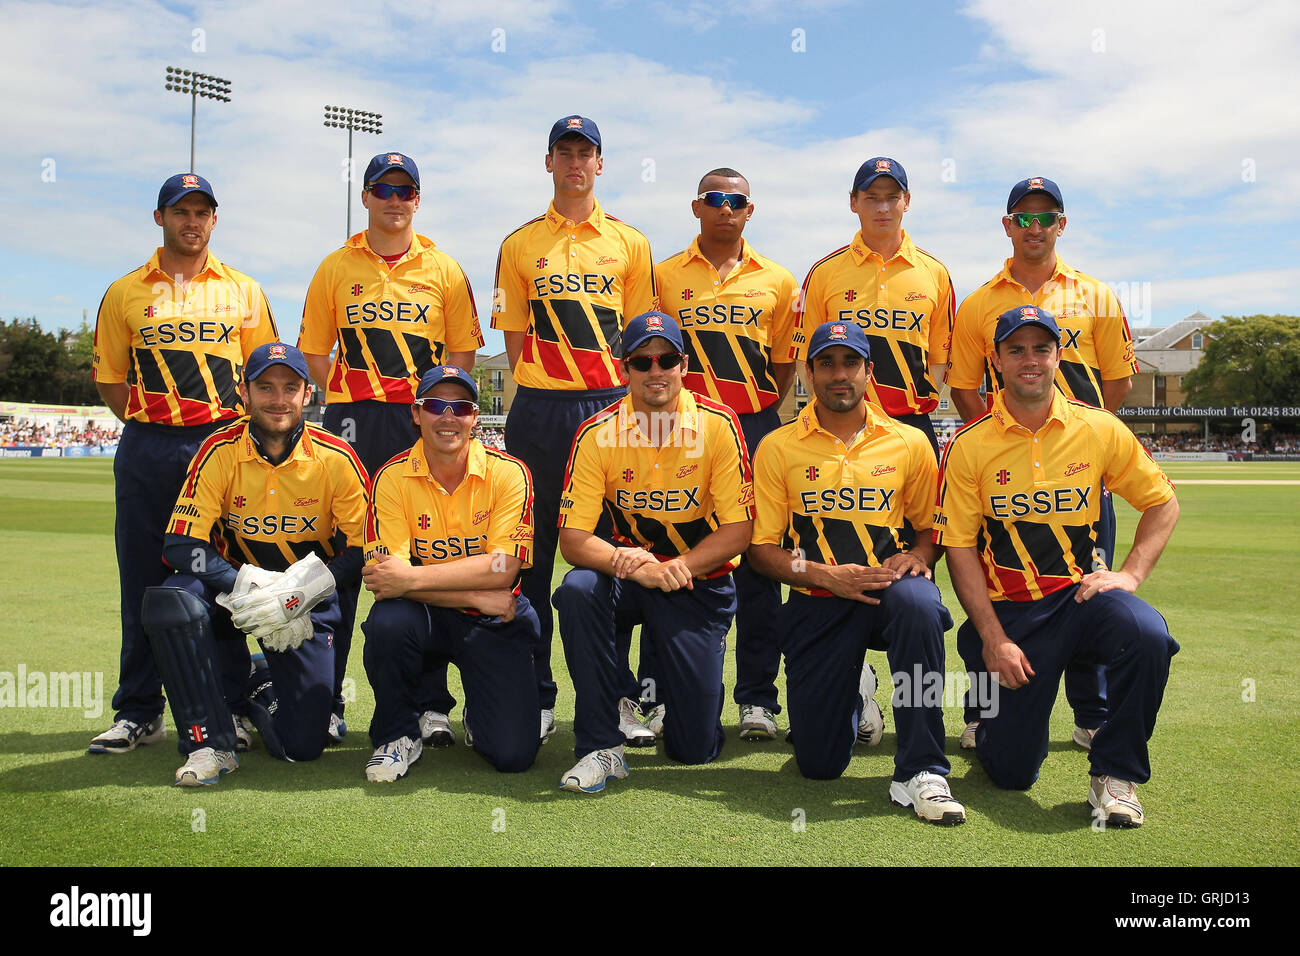 Essex players pose for a team photo before the game - Essex Eagles vs Australia - Tourist Match Cricket at the Ford County Ground, Chelmsford, Essex - 26/06/12 Stock Photo